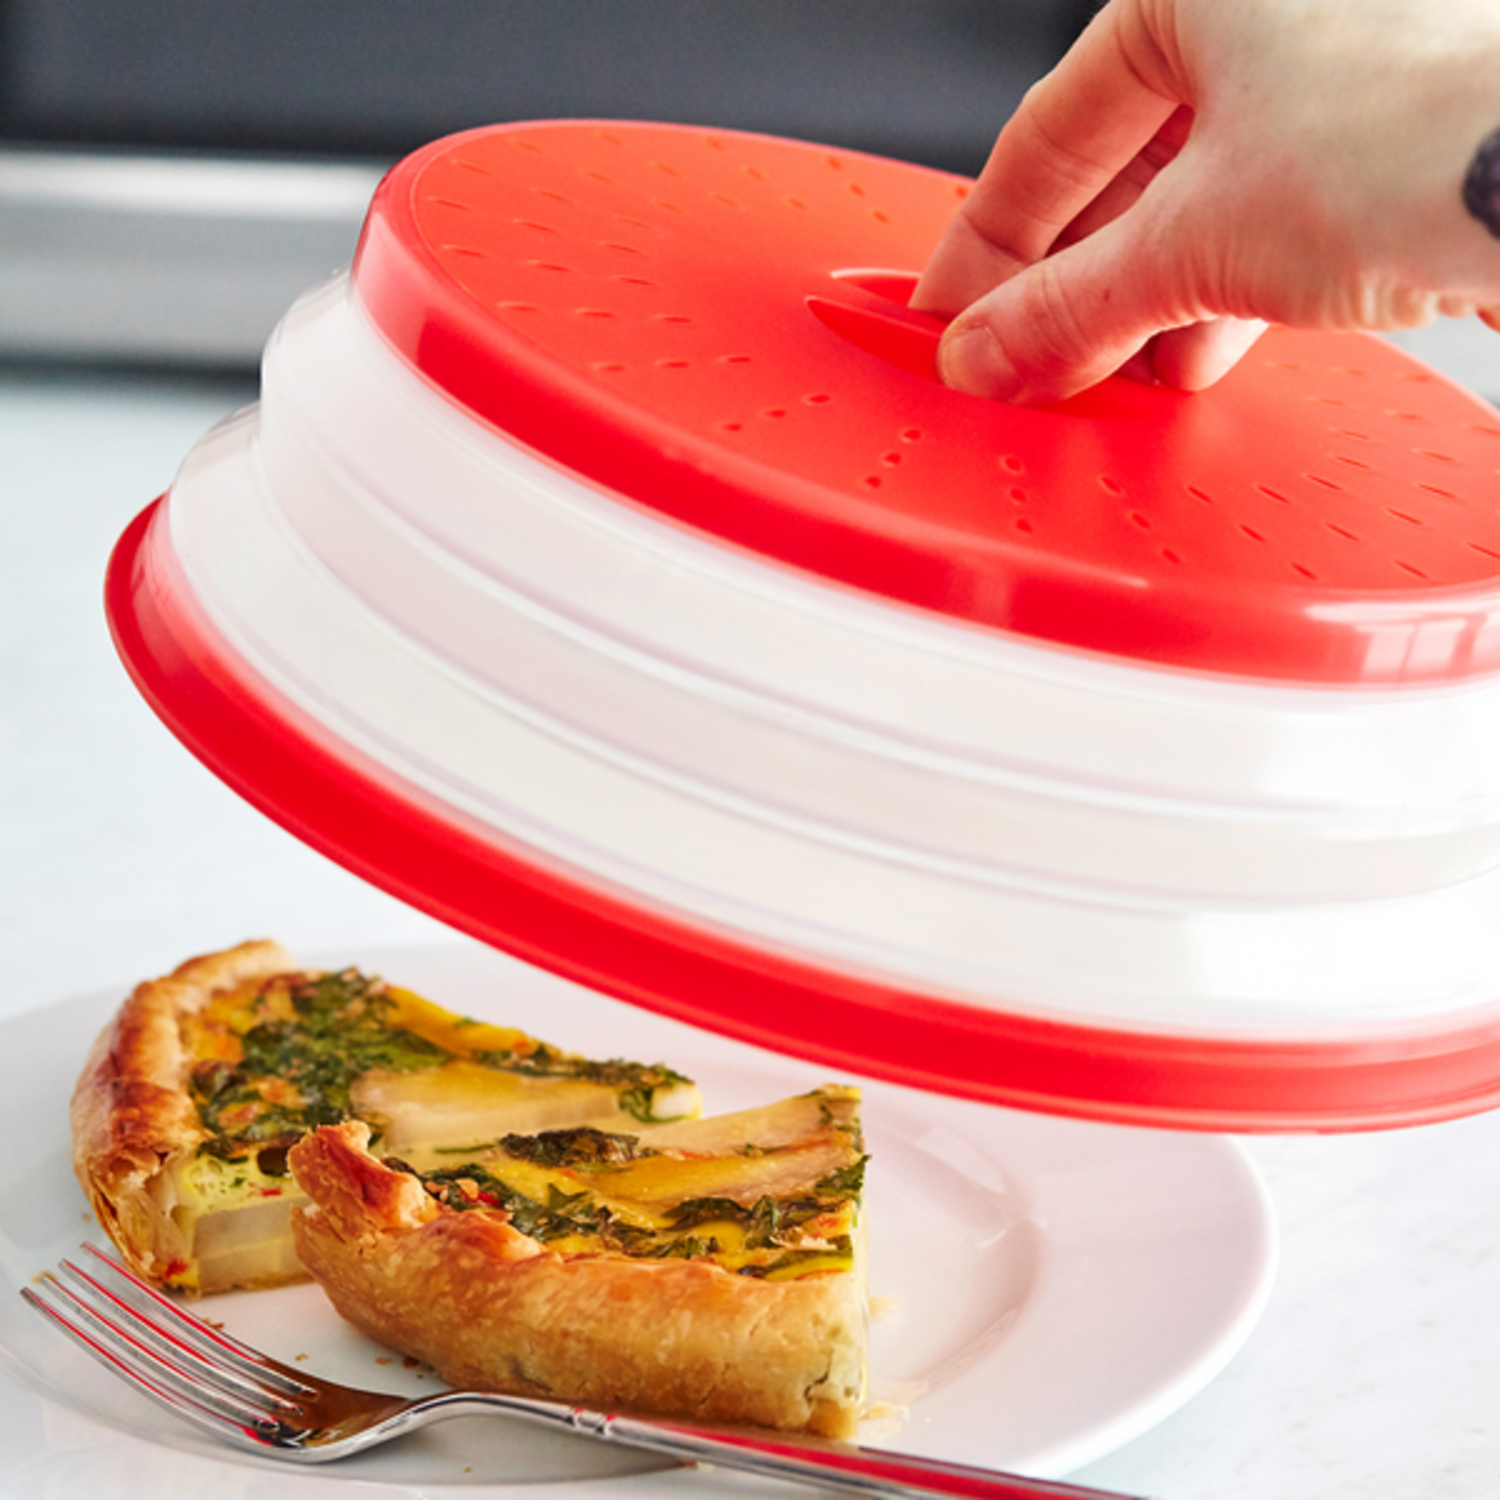 Microwave Food Covers - Silicone Vented Reusable Covers, From